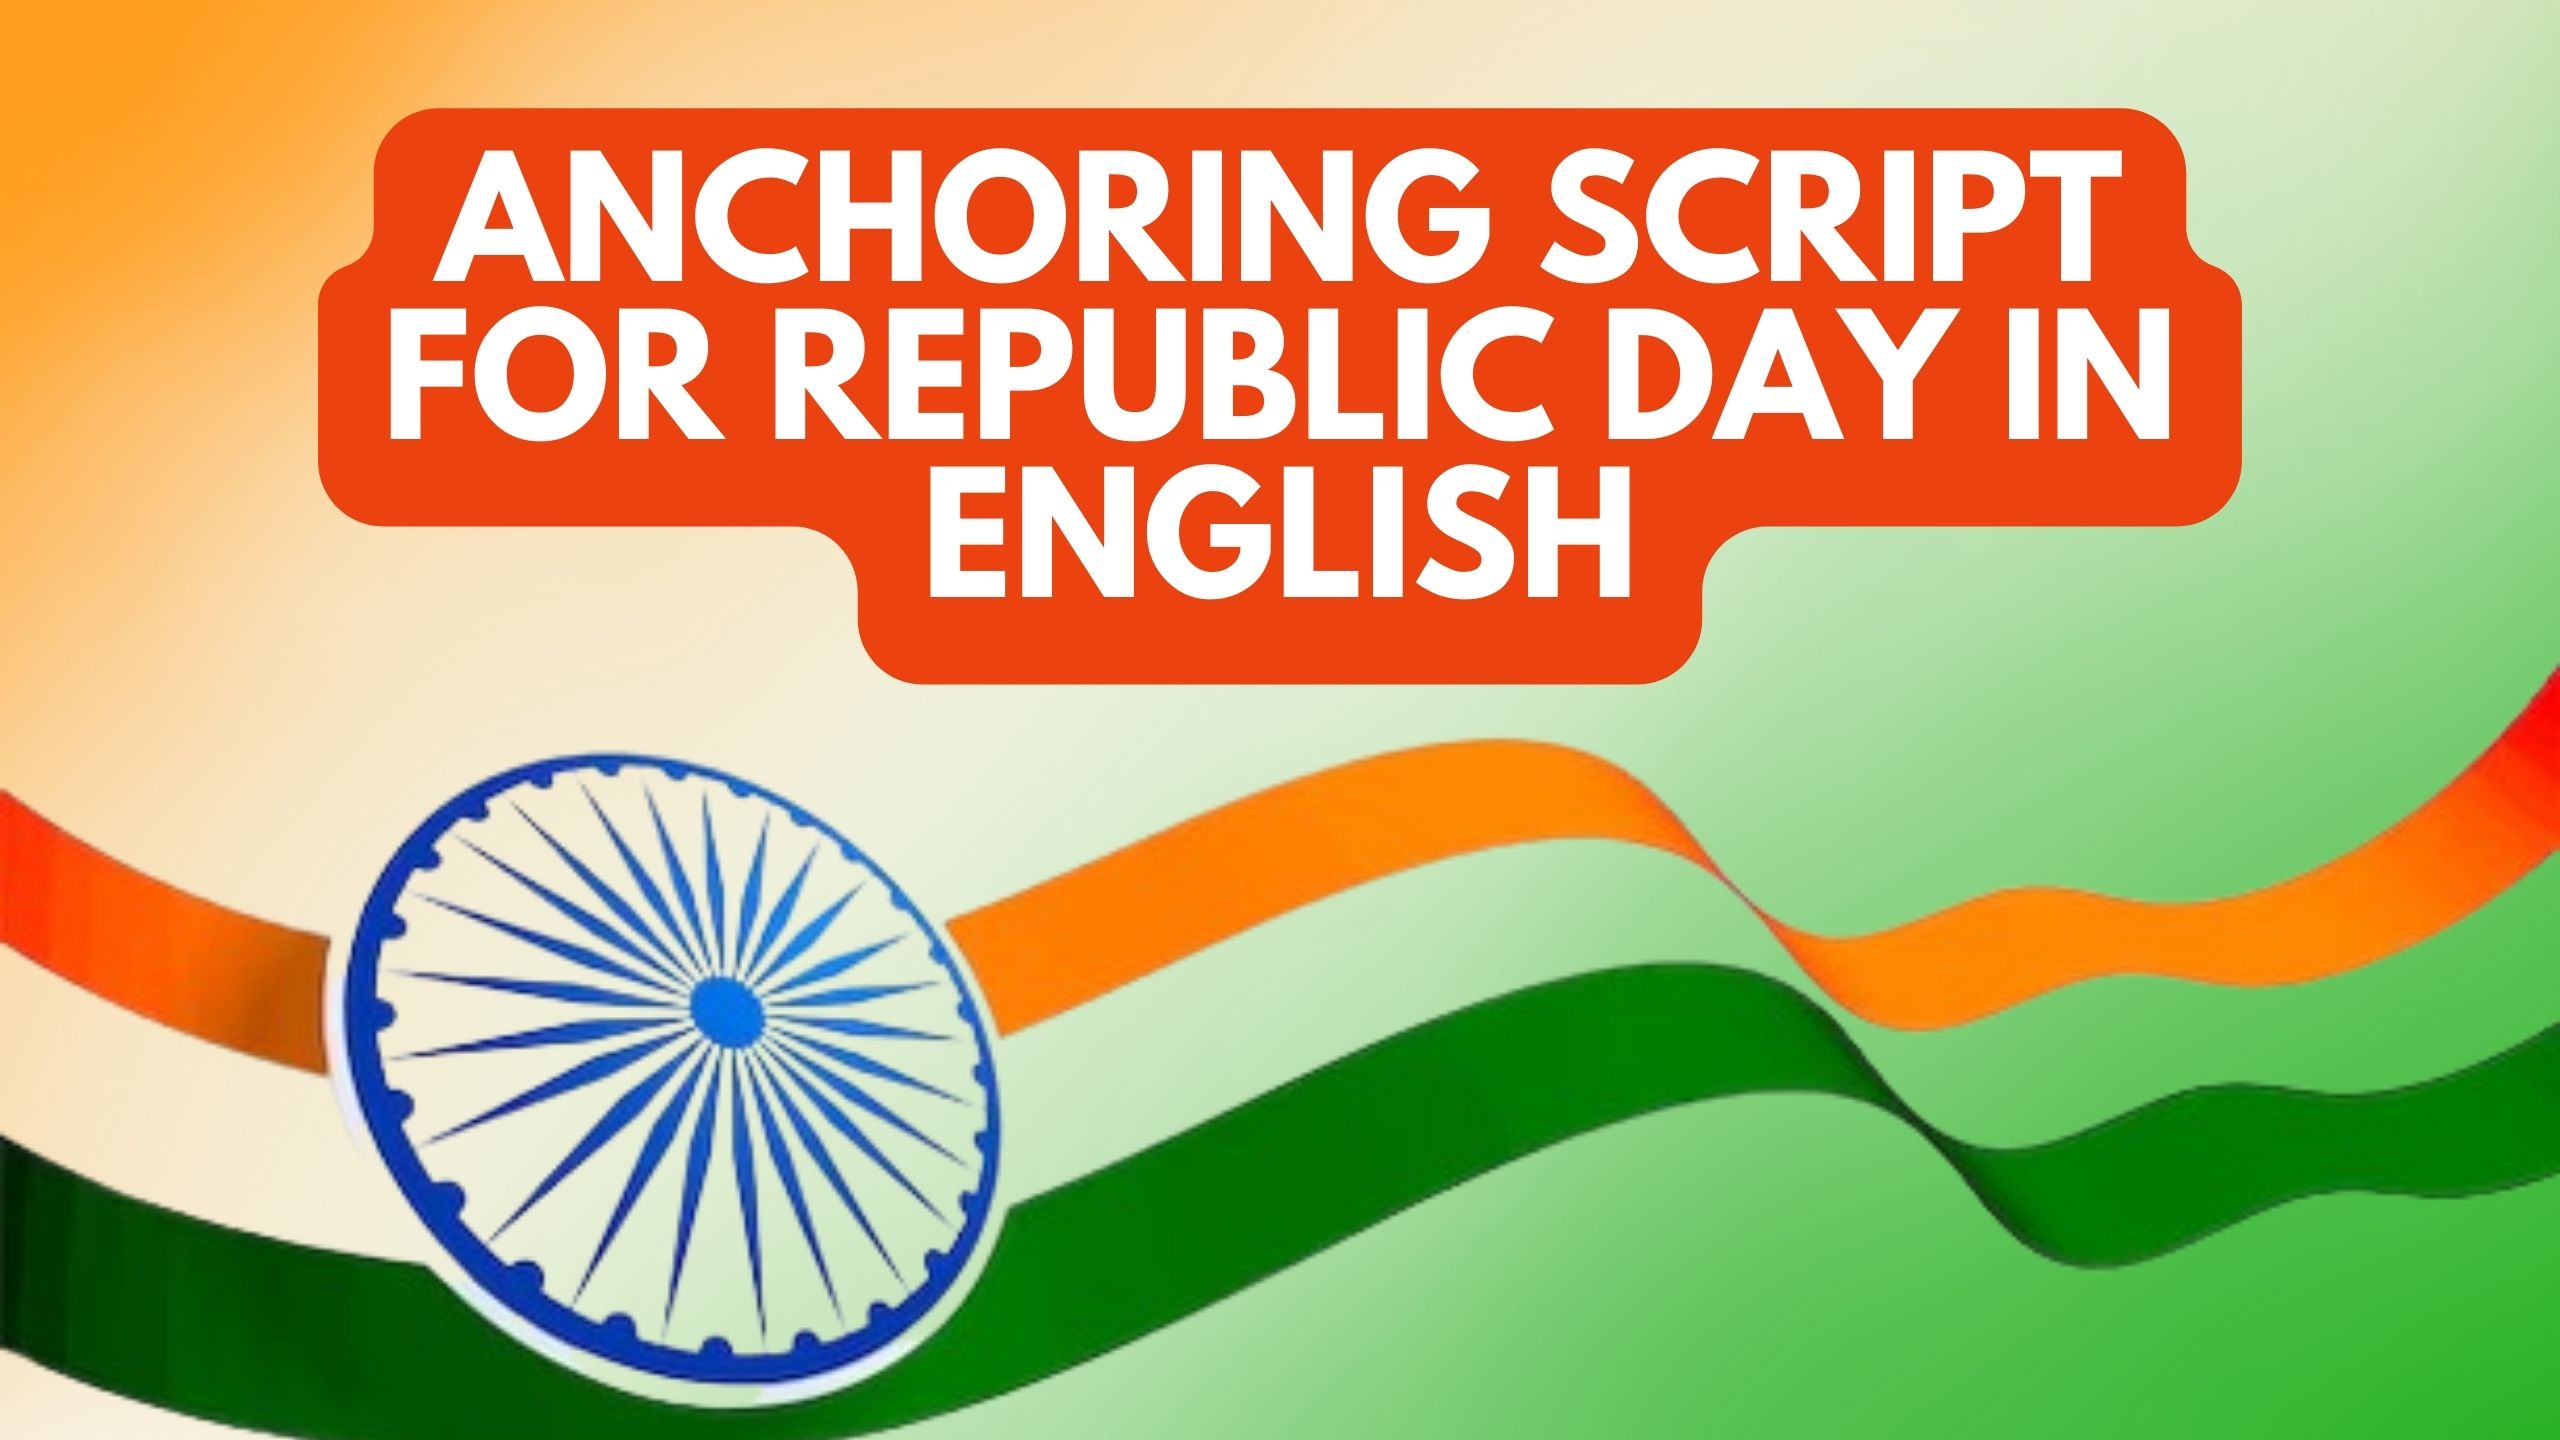 Anchoring Script for Republic Day in English